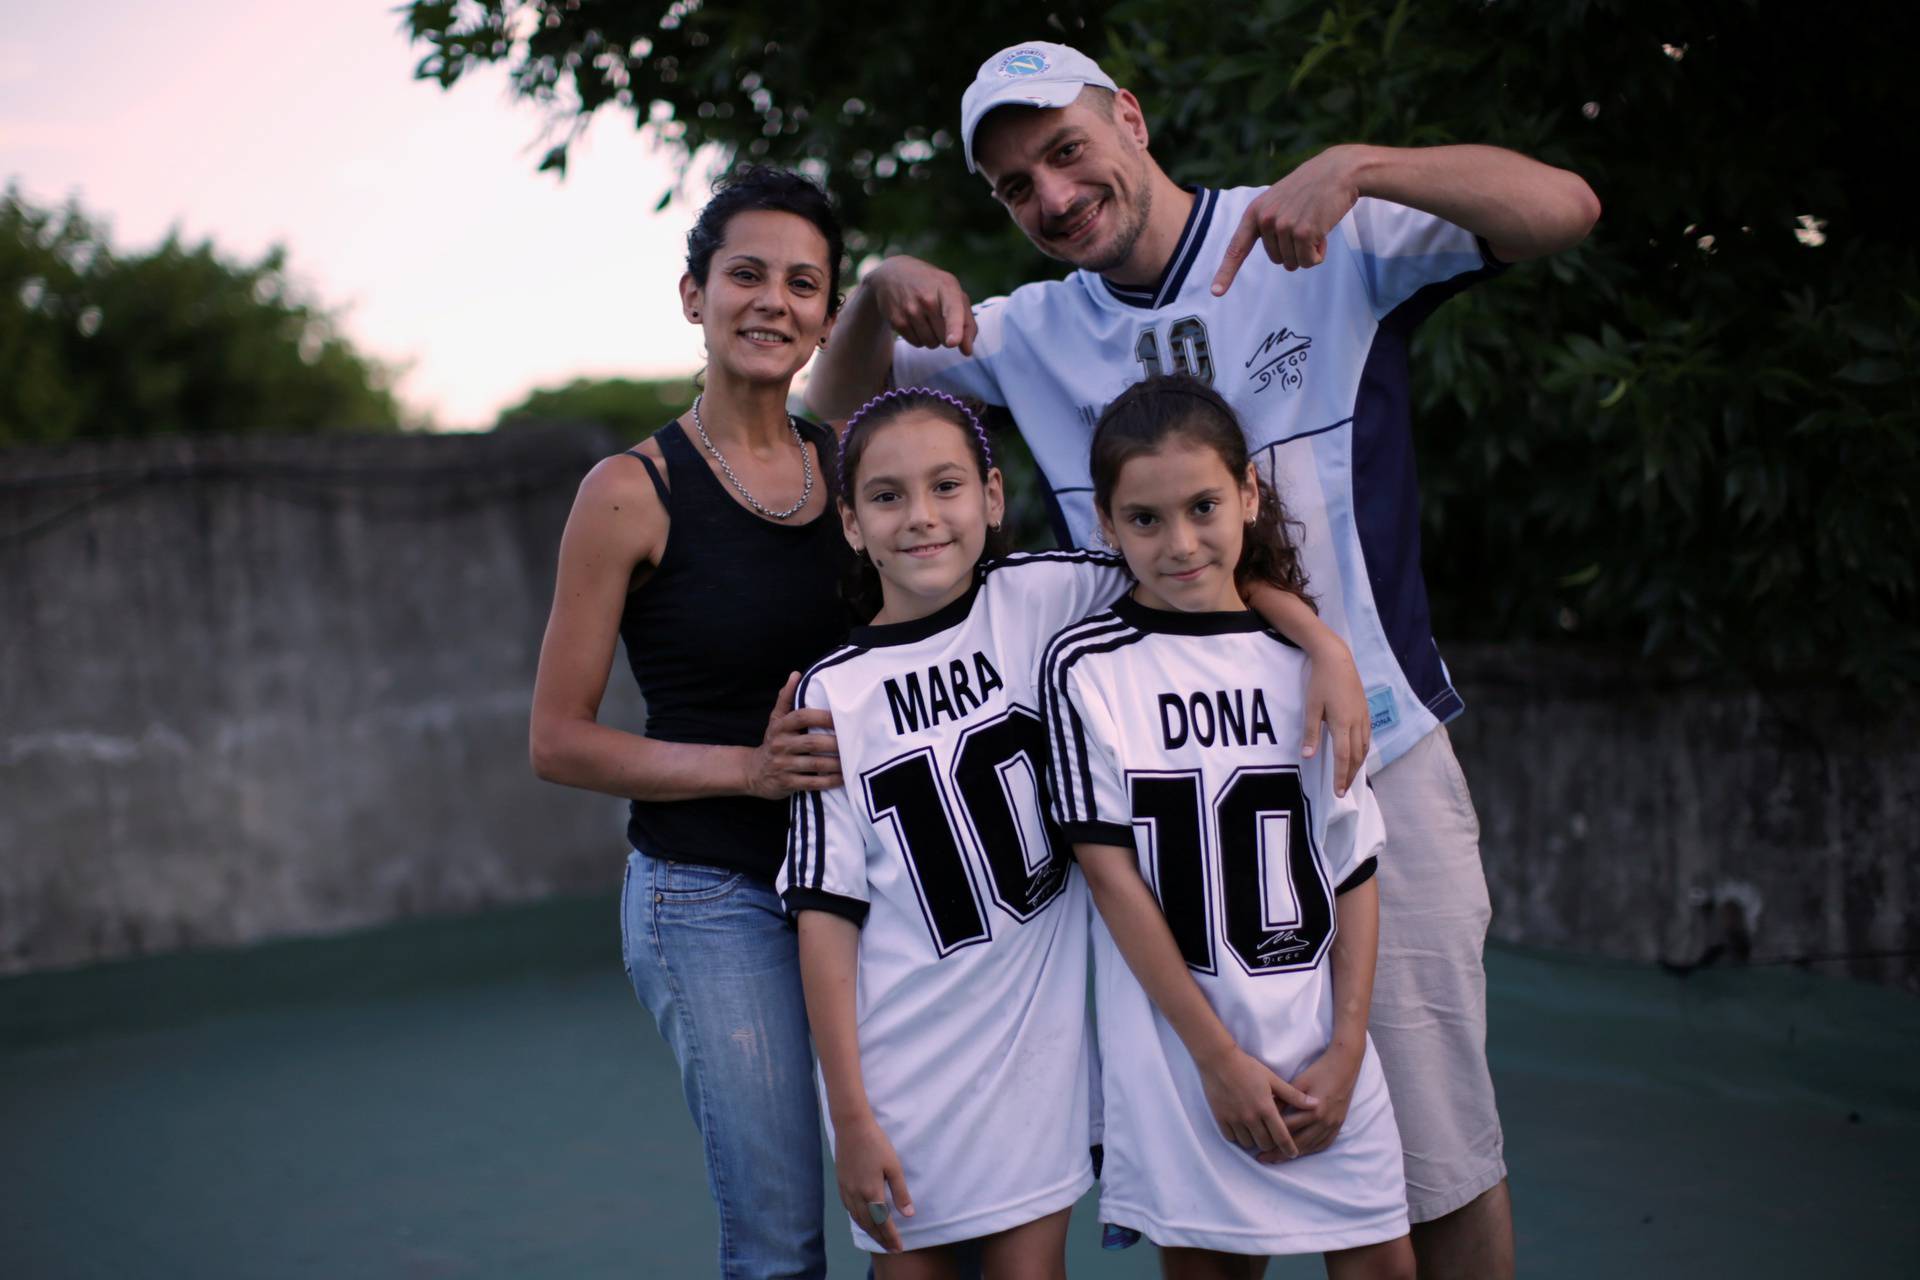 Walter Gaston Rotundo, a devoted Diego Maradona fan who named his twin daughters Mara and Dona after the soccer star, poses with his family in Buenos Aires